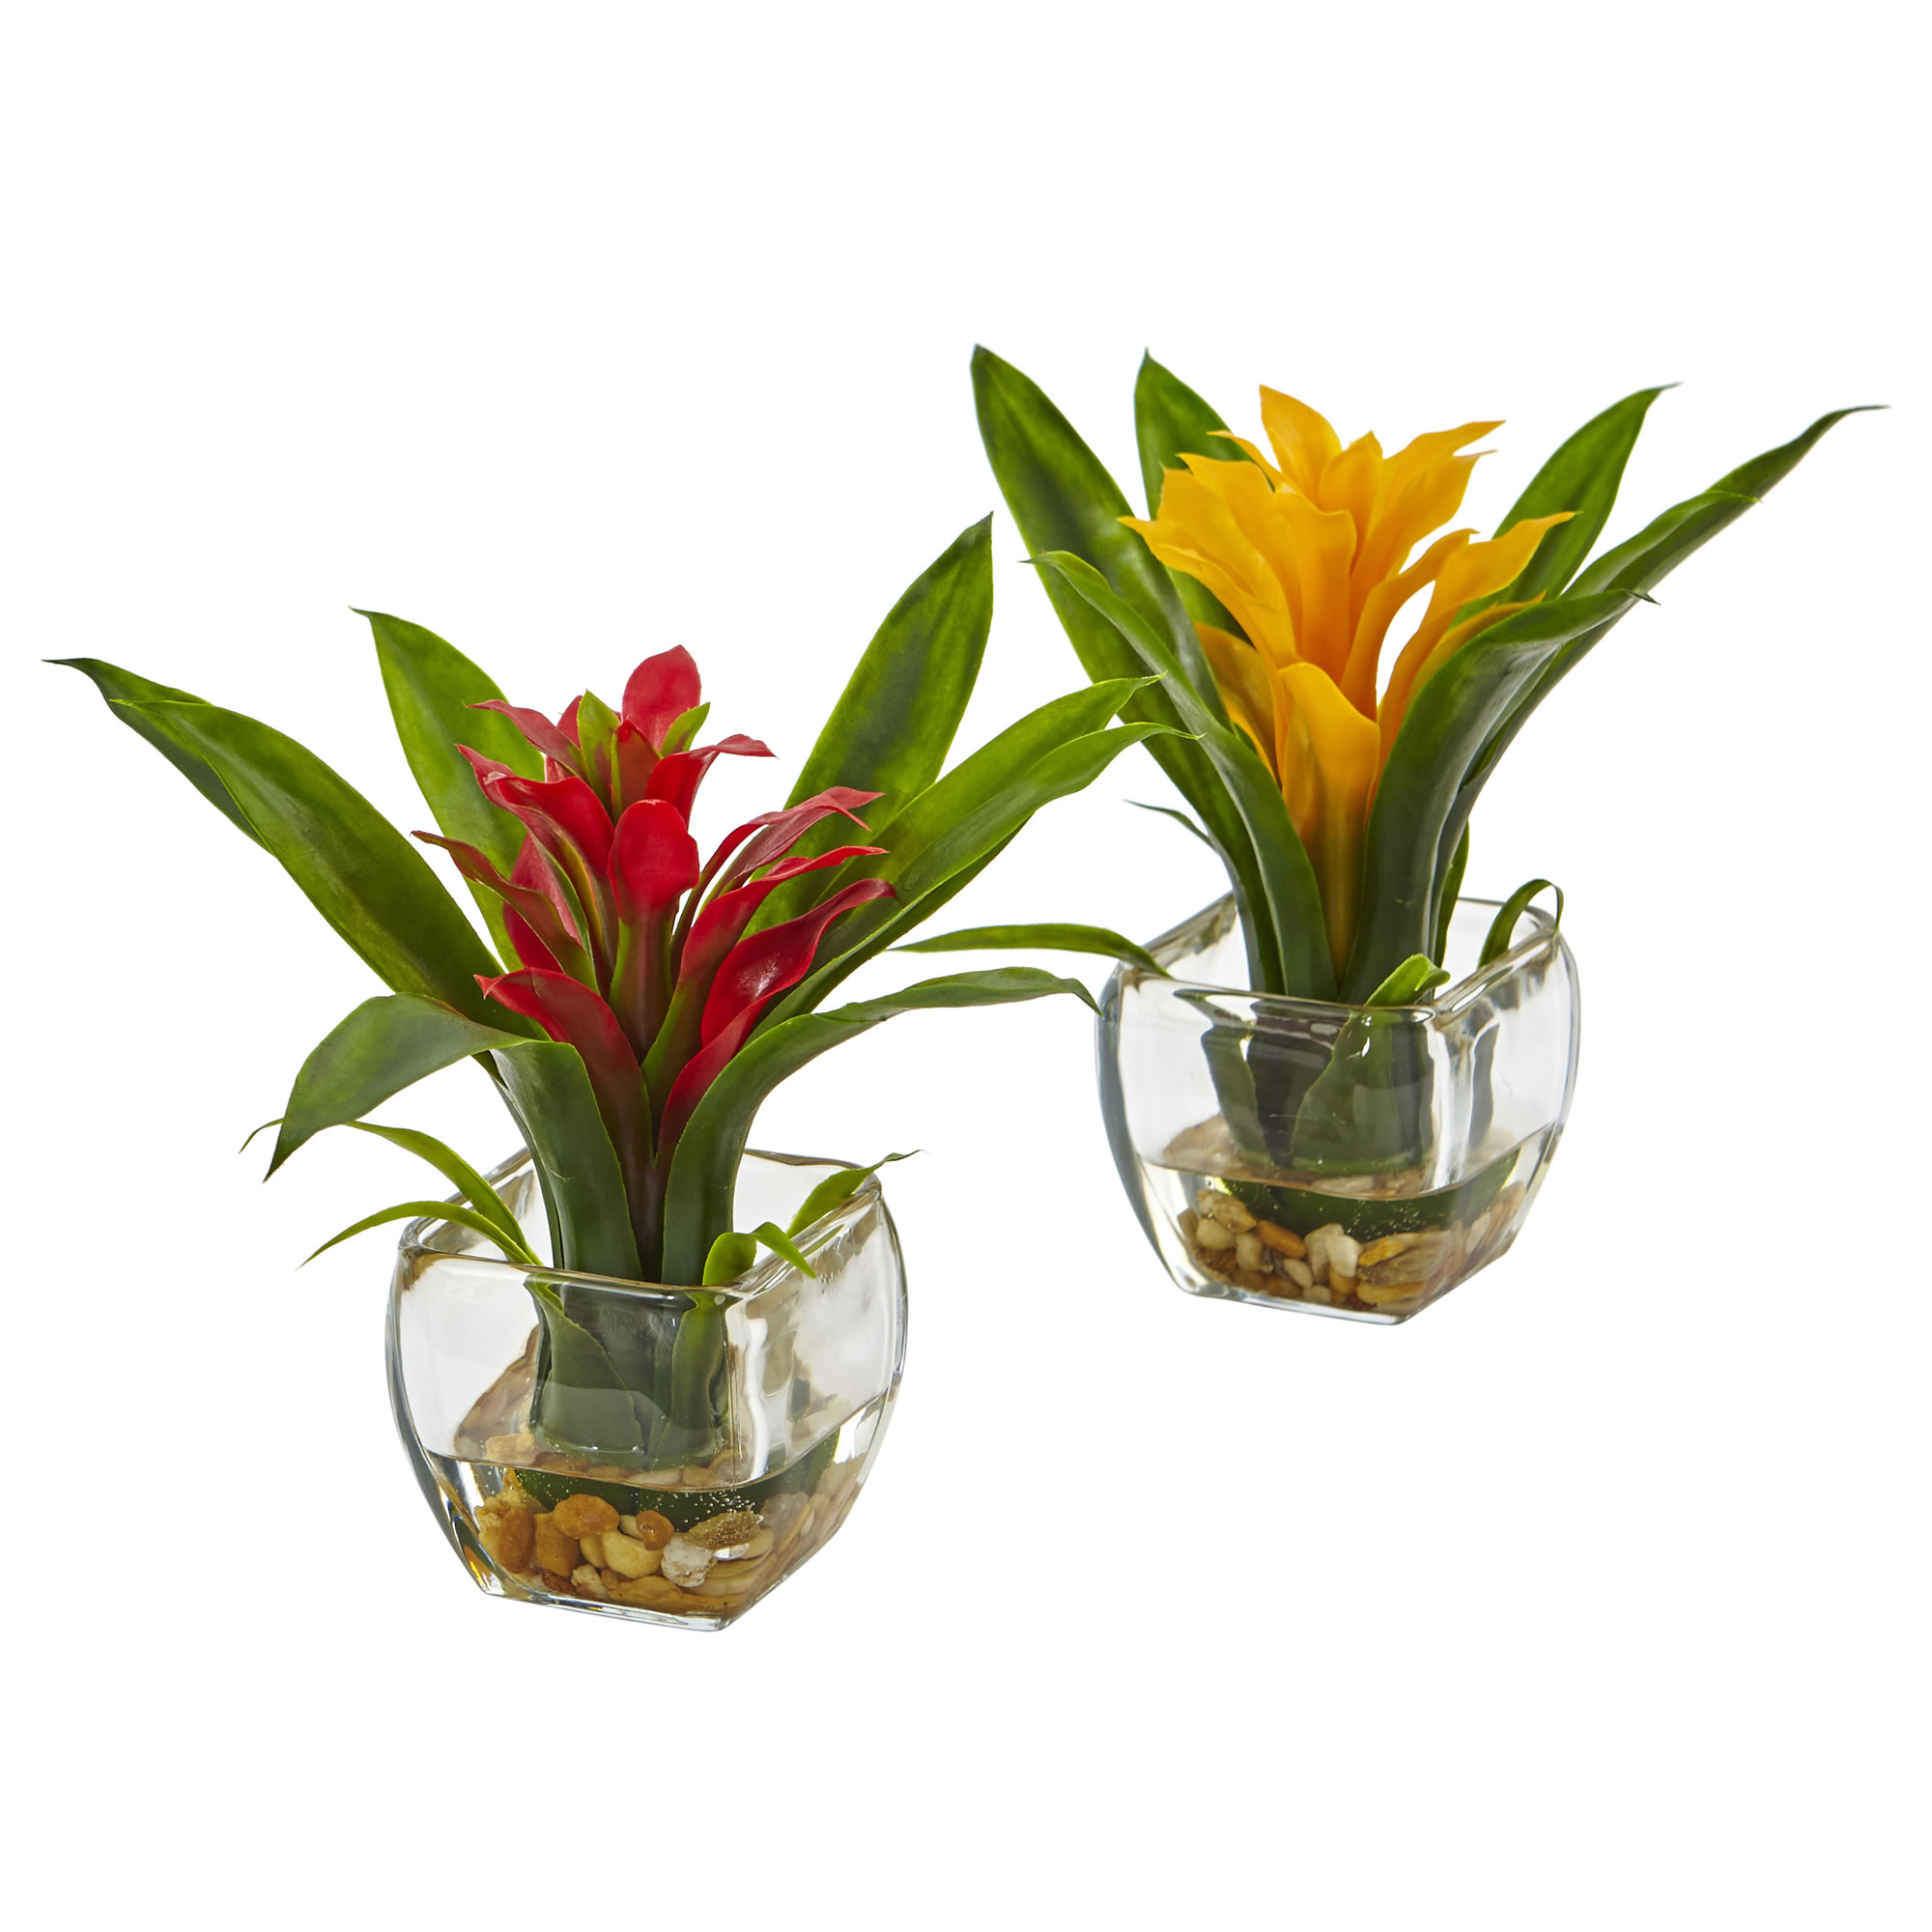 set of two tropical bromeliads flowers. With bold yellow and red petals. Lush green leaves grow vertically to cushion the flowers. Square glass vases with neutral pebbles and faux water.